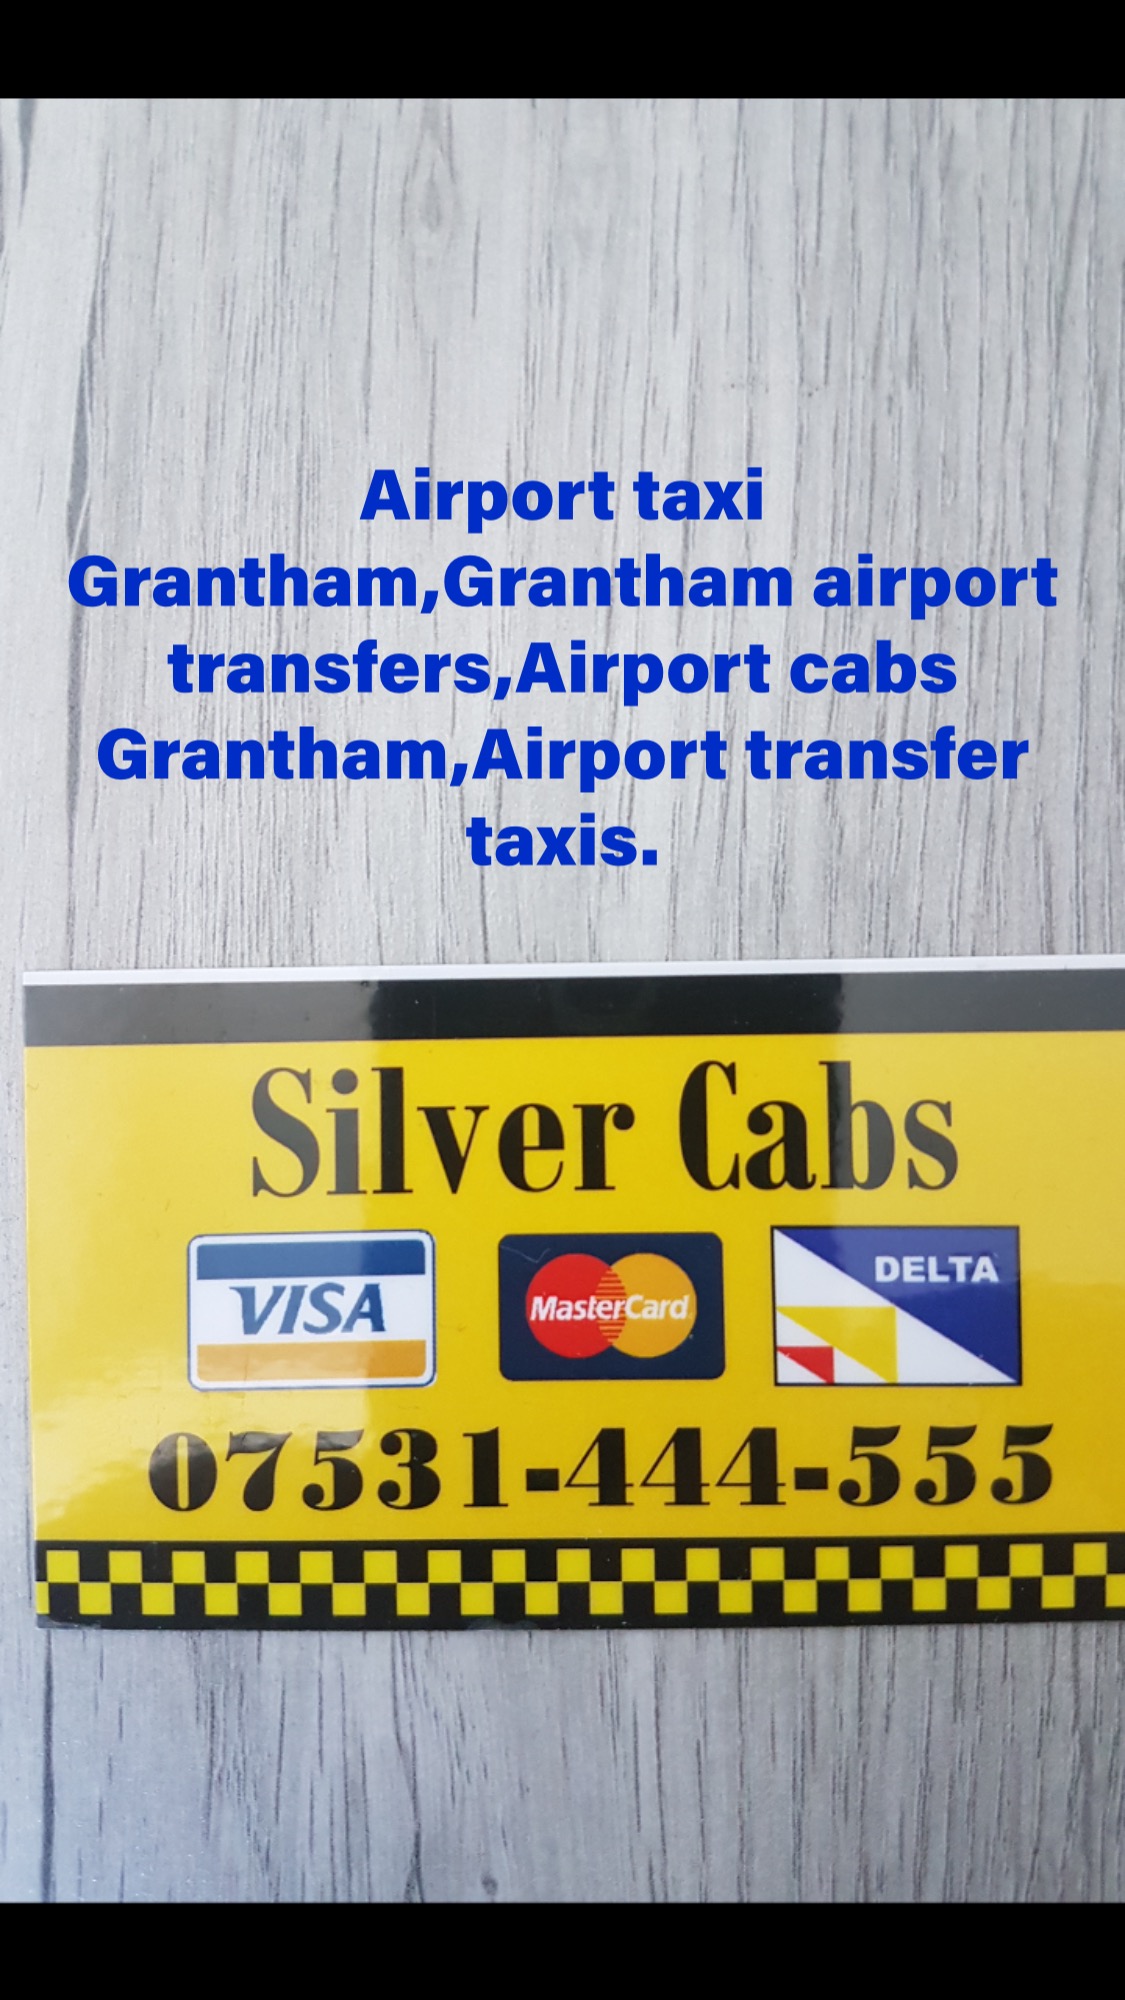 Logo of Silver Cabs Grantham Airport Transfer And Transportation Services In Grantham, Lincolnshire